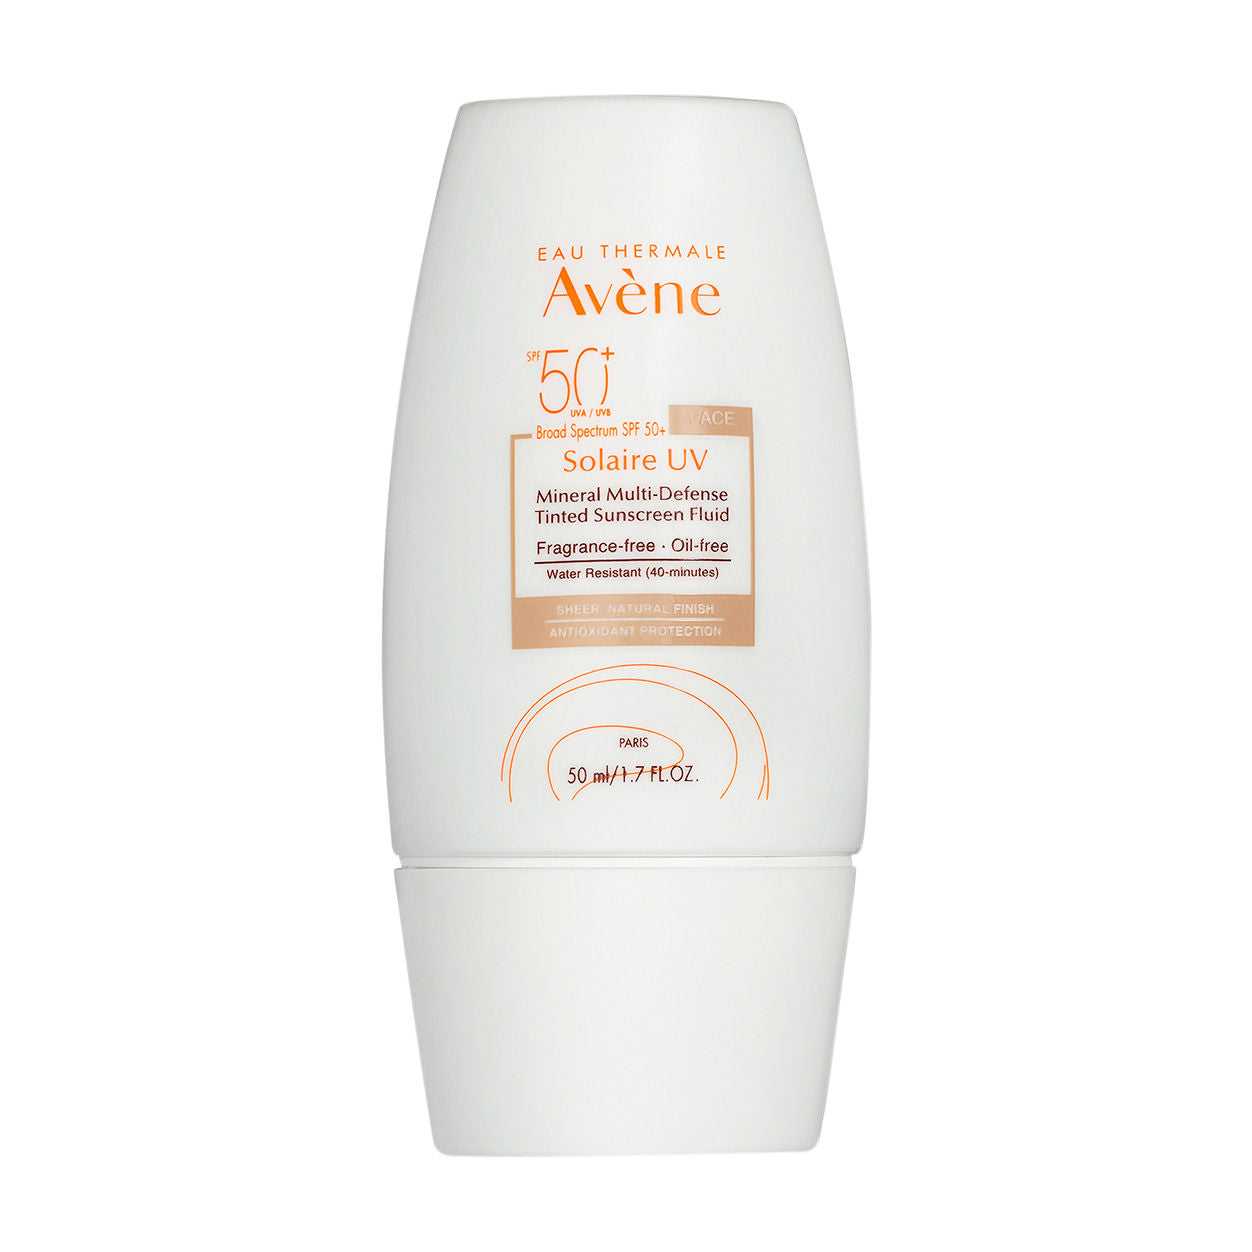 Avène Solaire UV Mineral Multi-Defense Tinted Sunscreen Fluid SPF 50+ main image